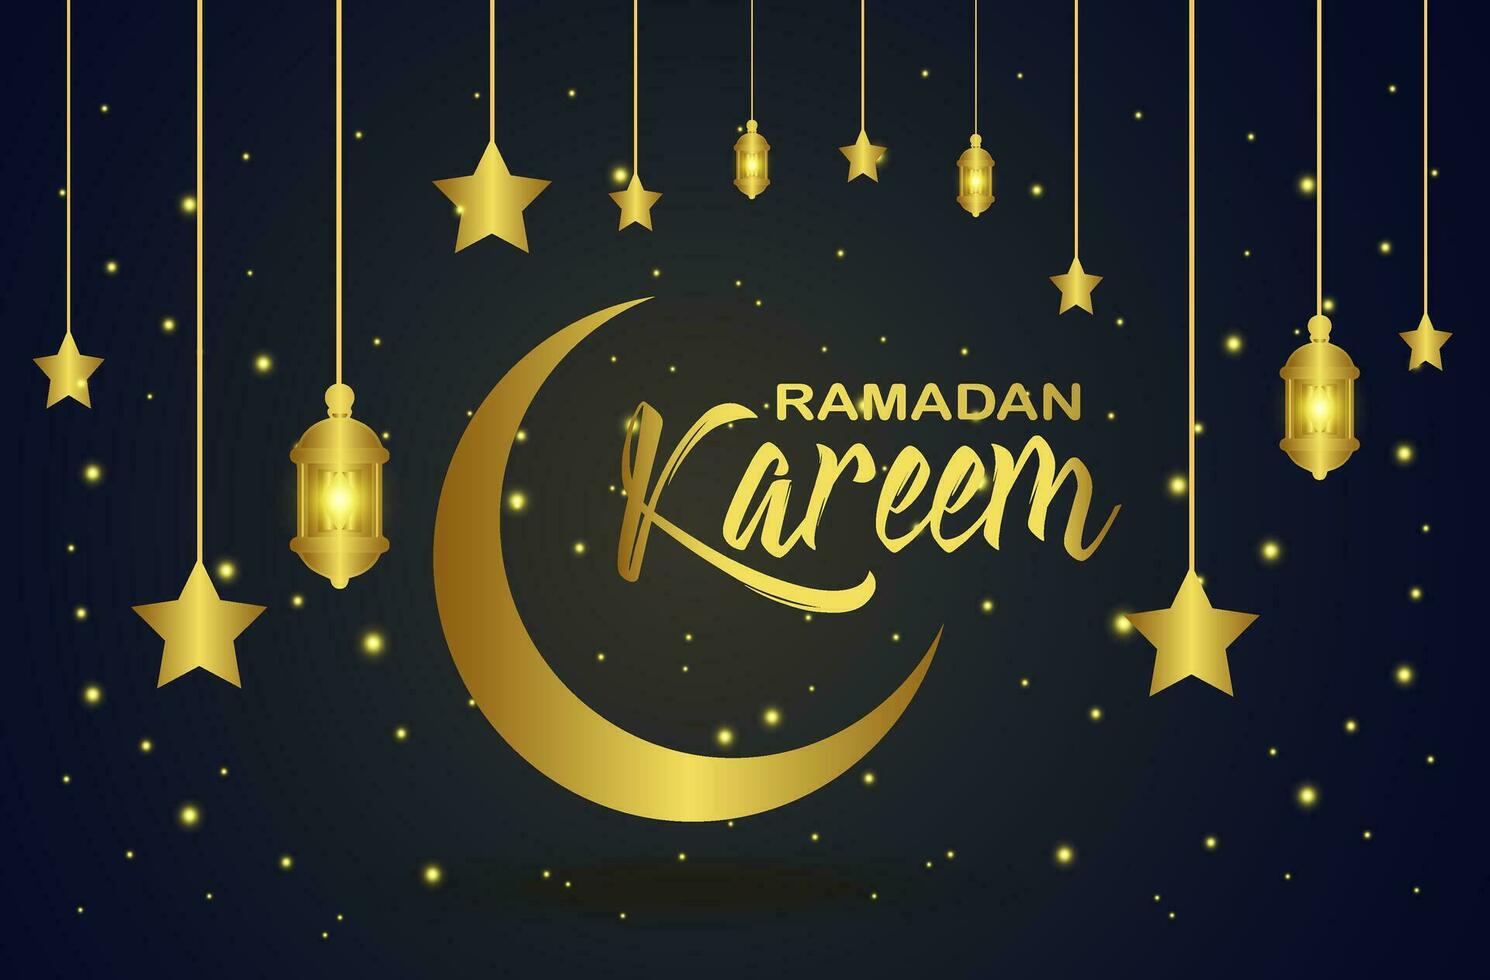 Islamic Crescent with mosque for Ramadan Kareem and Eid. Golden Half Moon pattern, background illustration. vector